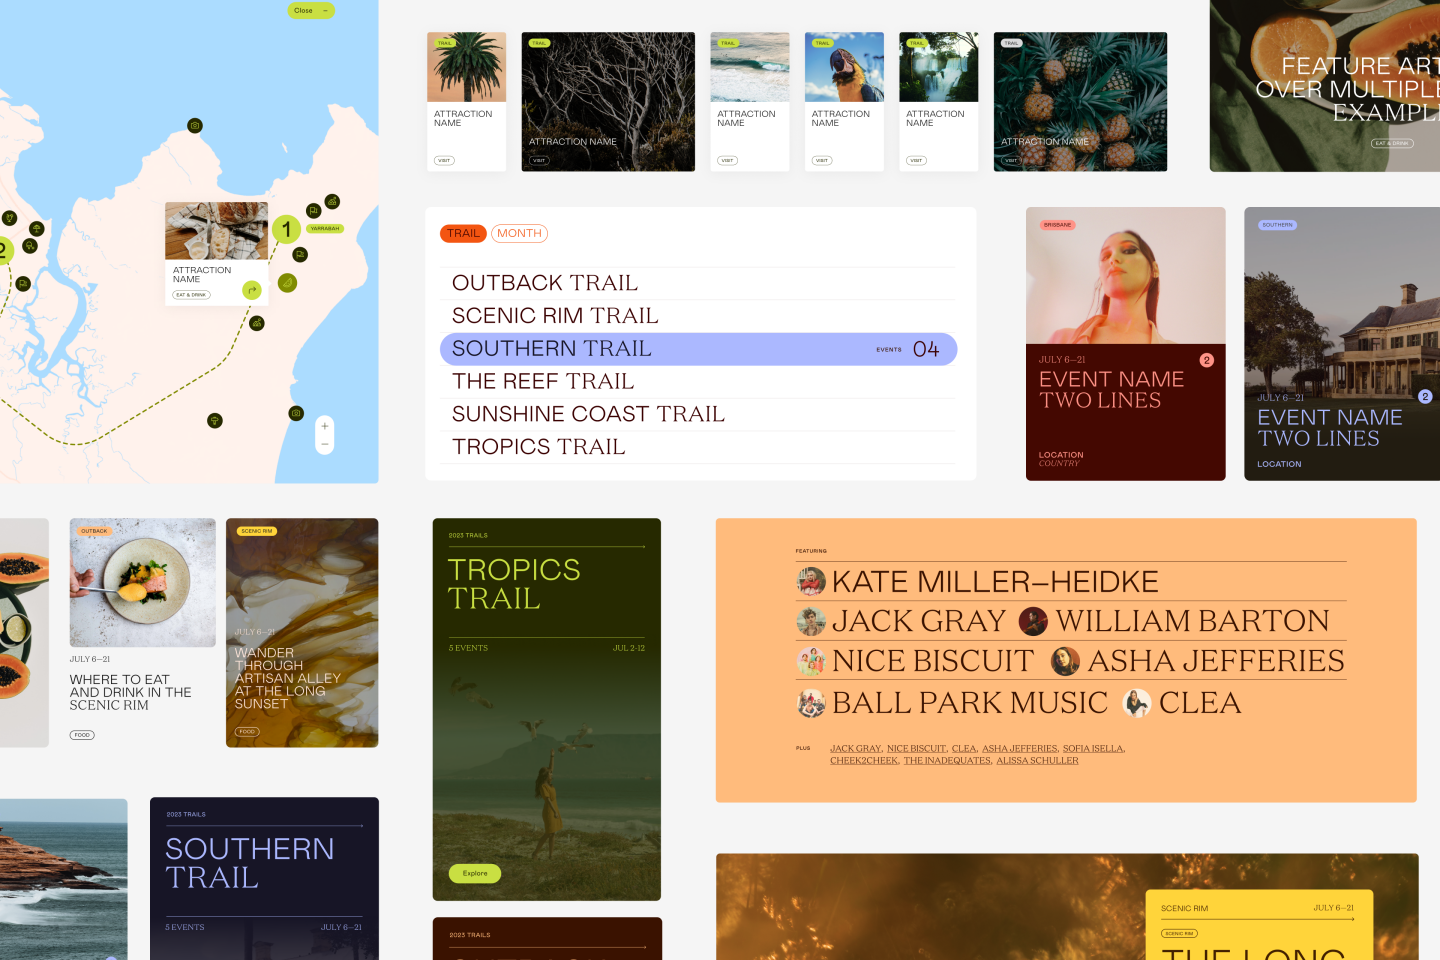 Examples of UI elements for the Trails website design